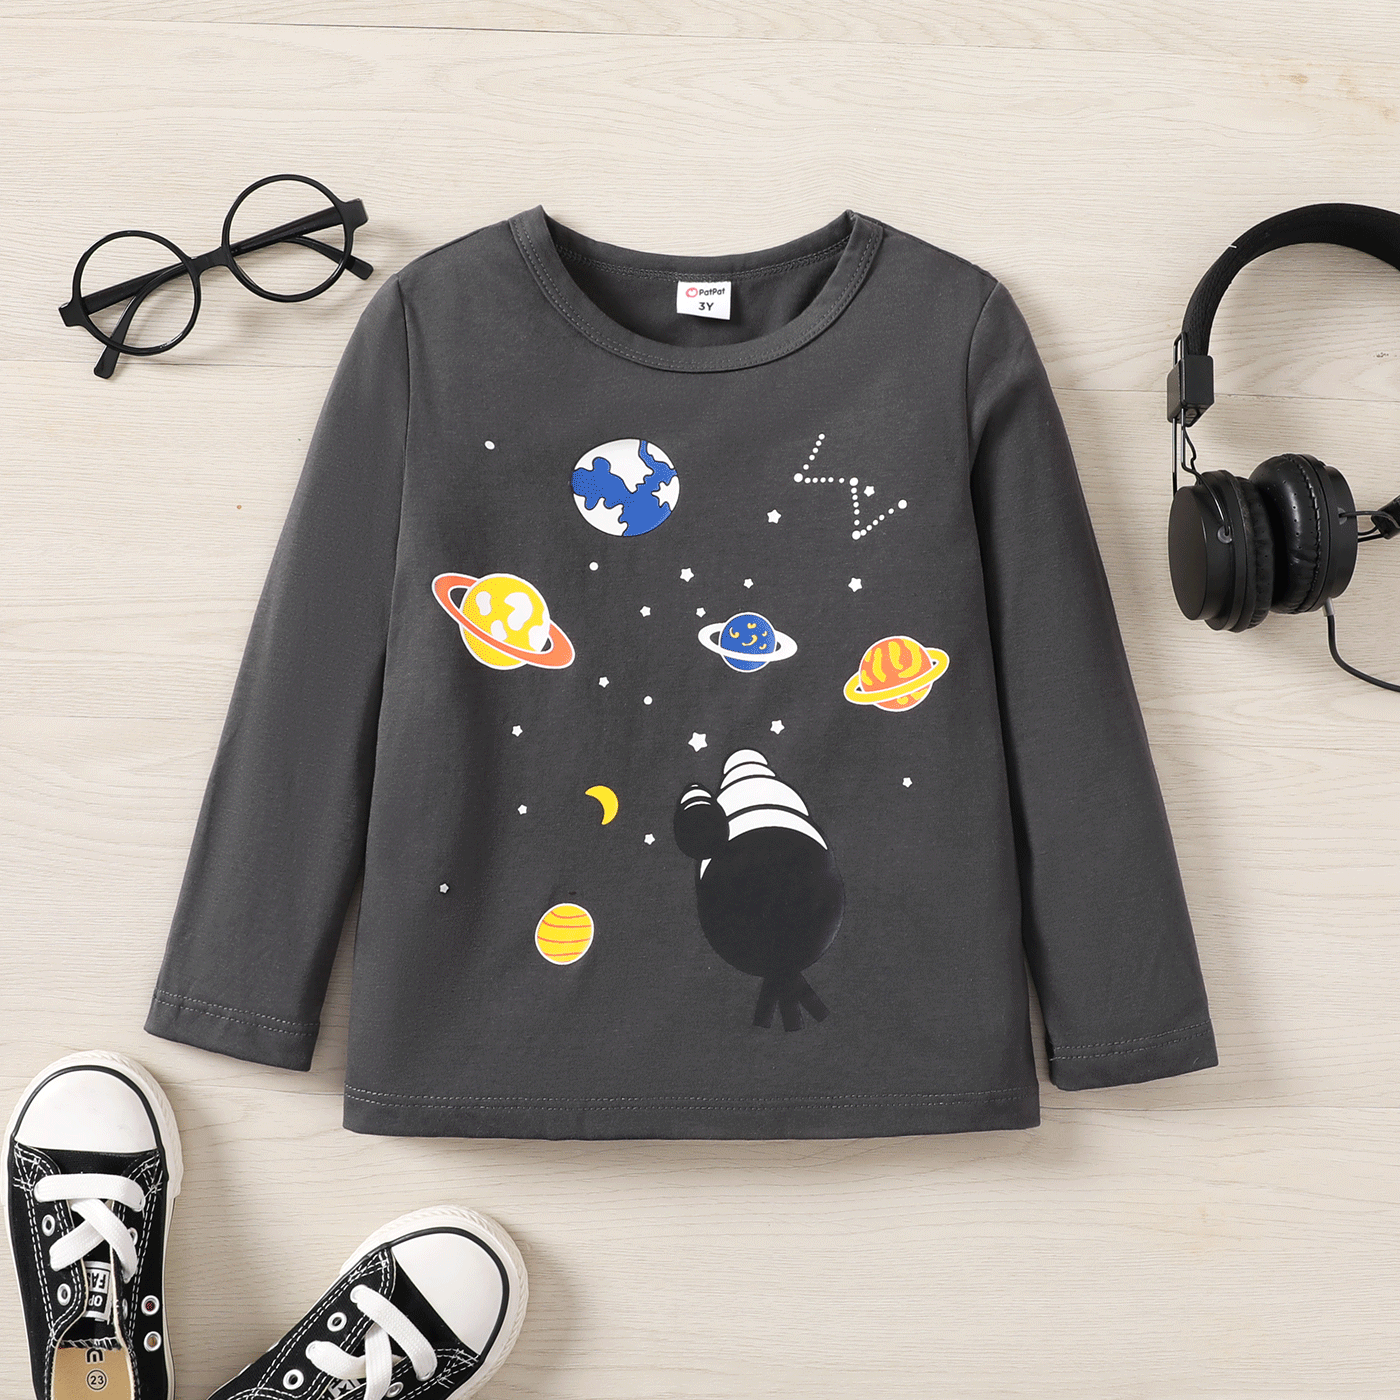 Toddler Boy Glow-in-the-dark Space Print T-shirt à Manches Longues